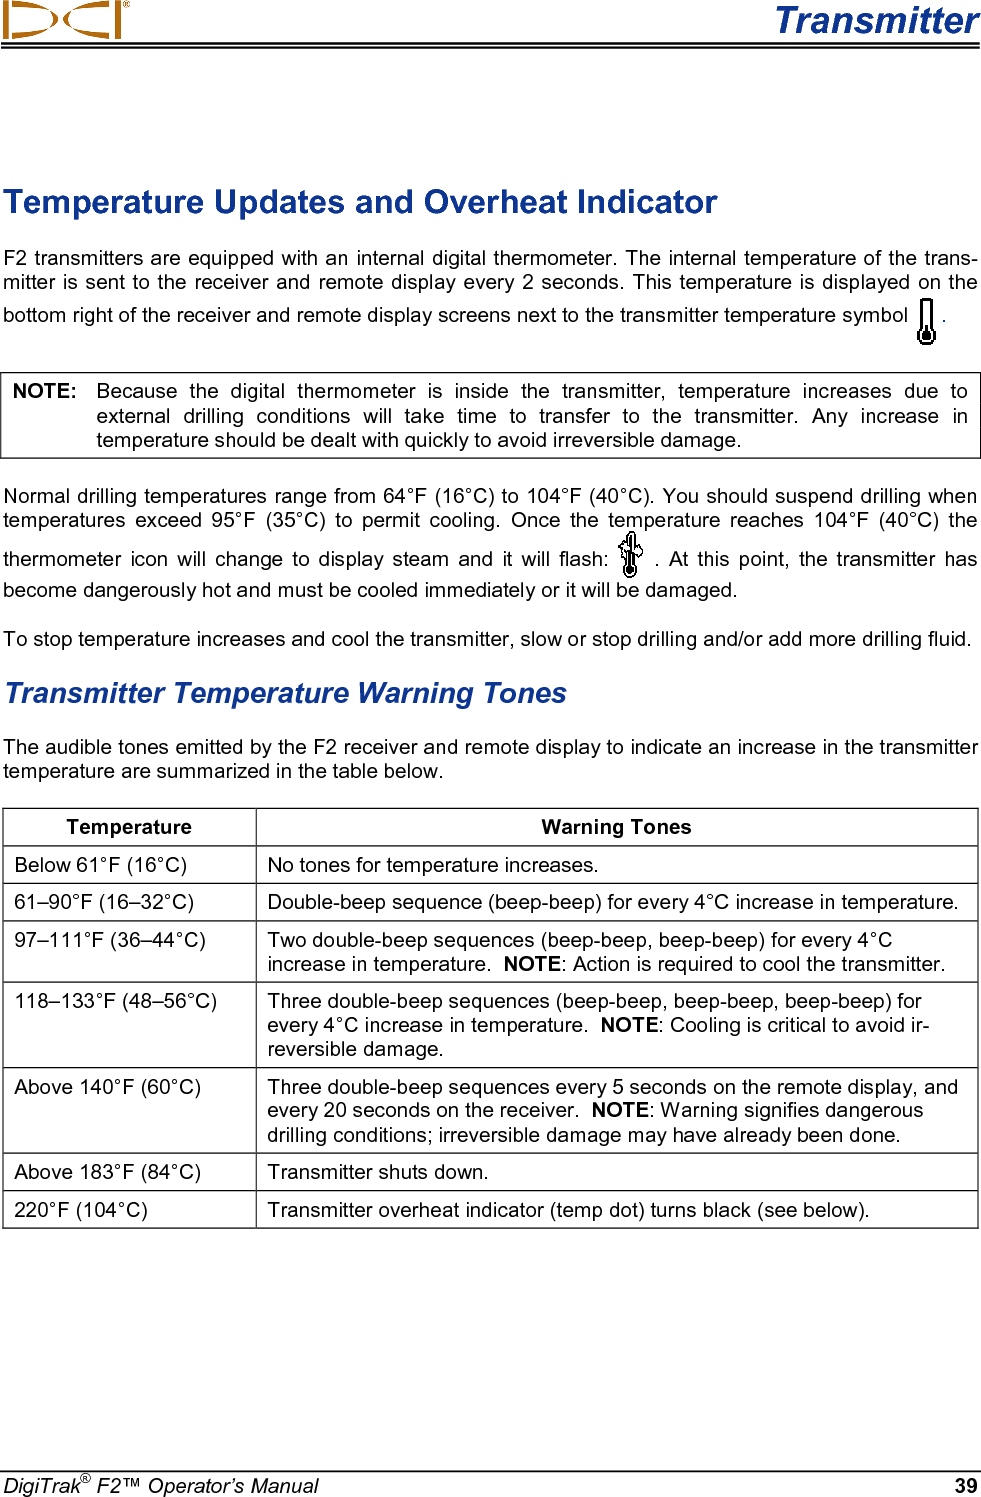  Transmitter DigiTrak® F2™ Operator’s Manual 39  Temperature Updates and Overheat Indicator F2 transmitters are equipped with an internal digital thermometer. The internal temperature of the trans-mitter is sent to the receiver and remote display every 2 seconds.  This temperature is displayed on the bottom right of the receiver and remote display screens next to the transmitter temperature symbol . NOTE:   Because the digital thermometer is inside the transmitter, temperature increases due to external drilling conditions will take time to transfer to the transmitter. Any increase in temperature should be dealt with quickly to avoid irreversible damage. Normal drilling temperatures range from 64°F (16°C) to 104°F (40°C). You should suspend drilling when temperatures exceed 95°F (35°C) to permit cooling. Once the temperature reaches 104°F (40°C) the thermometer icon will change to display steam and it will flash: . At this point, the transmitter has become dangerously hot and must be cooled immediately or it will be damaged. To stop temperature increases and cool the transmitter, slow or stop drilling and/or add more drilling fluid.  Transmitter Temperature Warning Tones The audible tones emitted by the F2 receiver and remote display to indicate an increase in the transmitter temperature are summarized in the table below.  Temperature Warning Tones Below 61°F (16°C) No tones for temperature increases. 61–90°F (16–32°C)  Double-beep sequence (beep-beep) for every 4°C increase in temperature. 97–111°F (36–44°C)  Two double-beep sequences (beep-beep, beep-beep) for every 4°C increase in temperature.  NOTE: Action is required to cool the transmitter. 118–133°F (48–56°C) Three double-beep sequences (beep-beep, beep-beep, beep-beep) for every 4°C increase in temperature.  NOTE: Cooling is critical to avoid ir-reversible damage.  Above 140°F (60°C)  Three double-beep sequences every 5 seconds on the remote display, and every 20 seconds on the receiver.  NOTE: Warning signifies dangerous drilling conditions; irreversible damage may have already been done. Above 183°F (84°C) Transmitter shuts down. 220°F (104°C) Transmitter overheat indicator (temp dot) turns black (see below).  